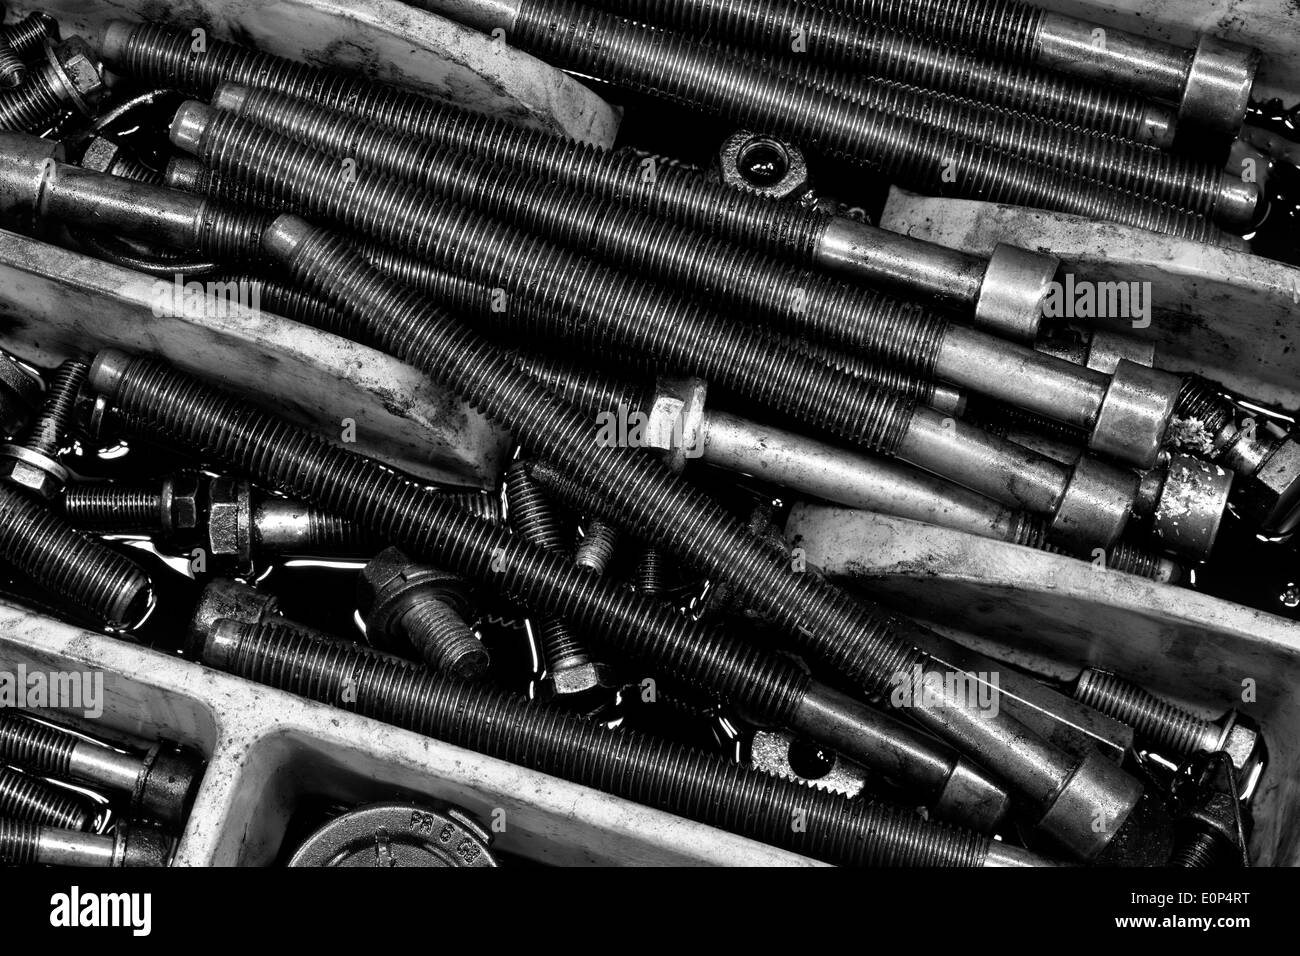 Bolts and nuts from a car engine Stock Photo